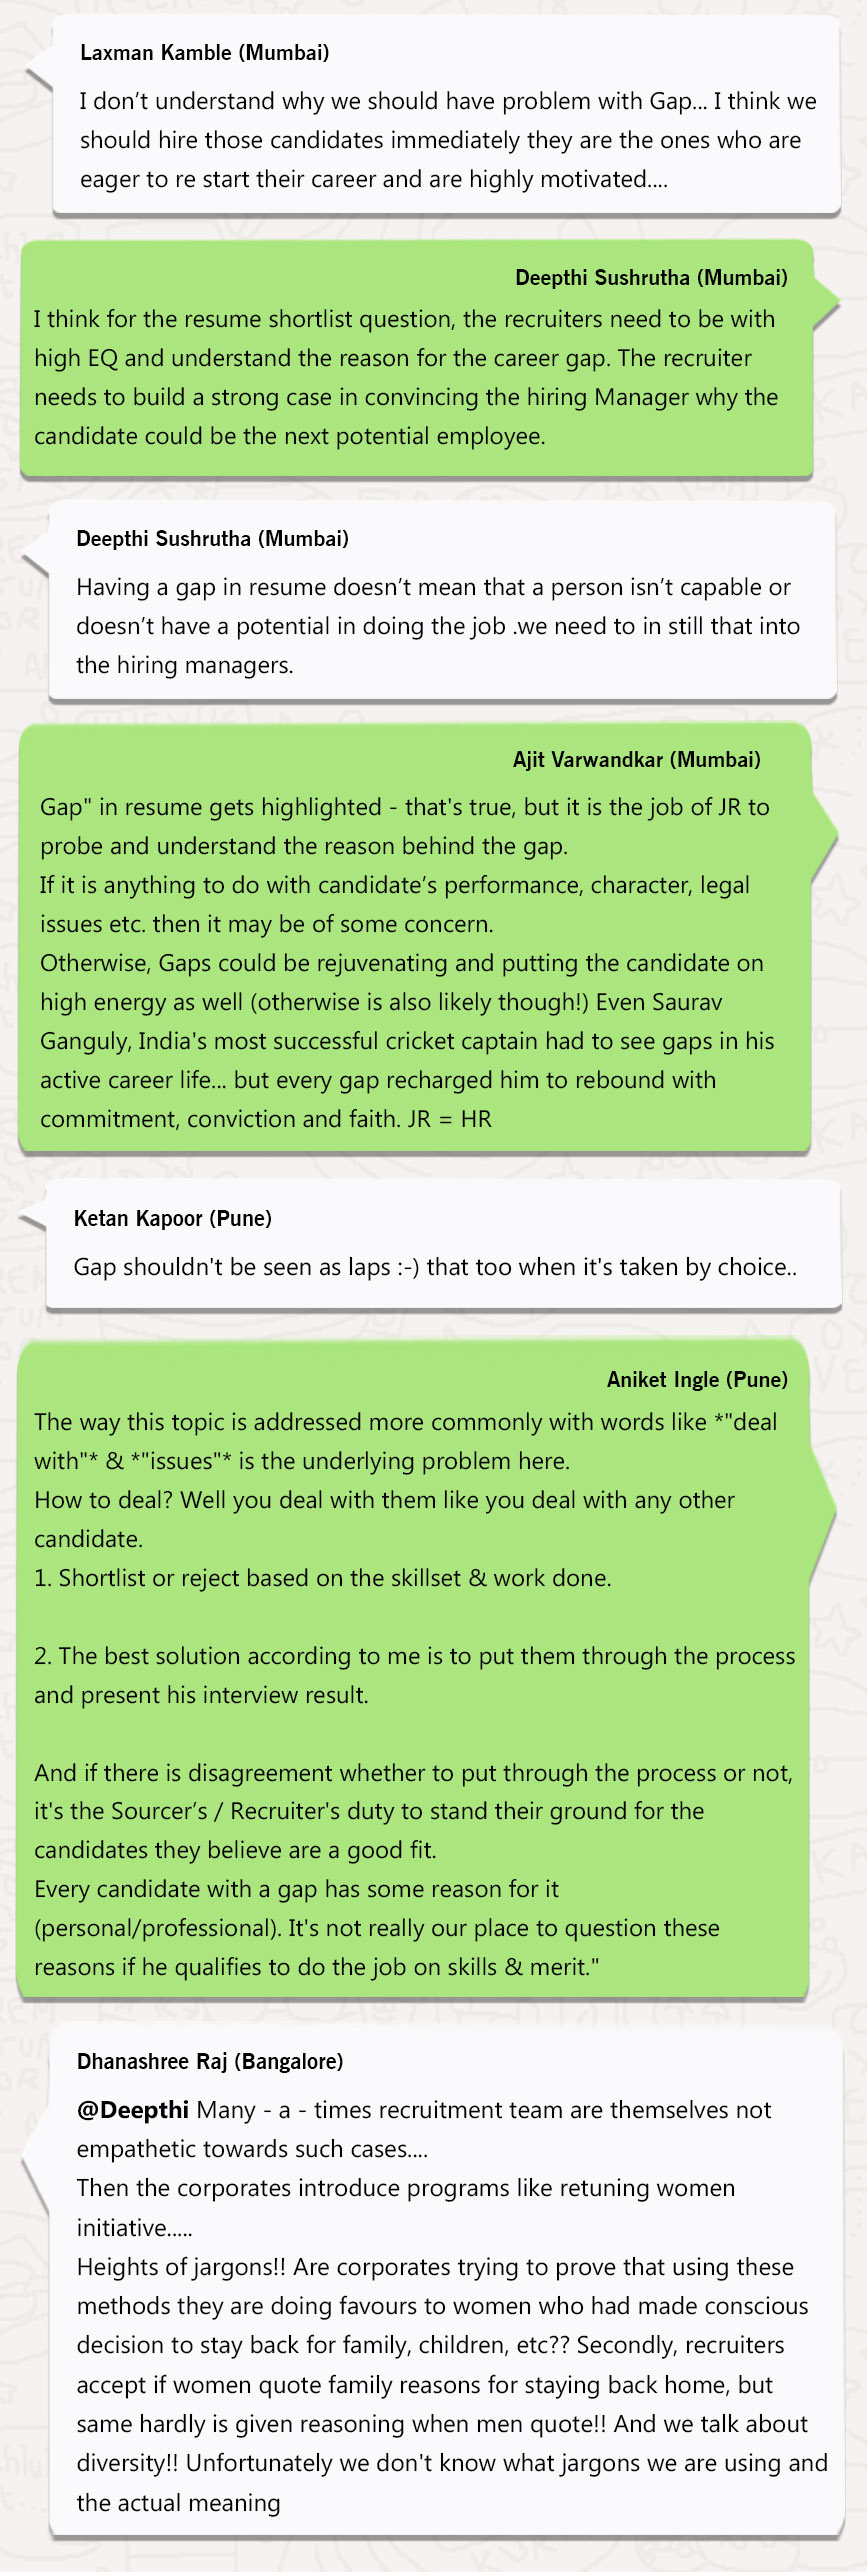 WhatsApp Group Chat â€“ How should Recruiters deal with candidates having an employment gap